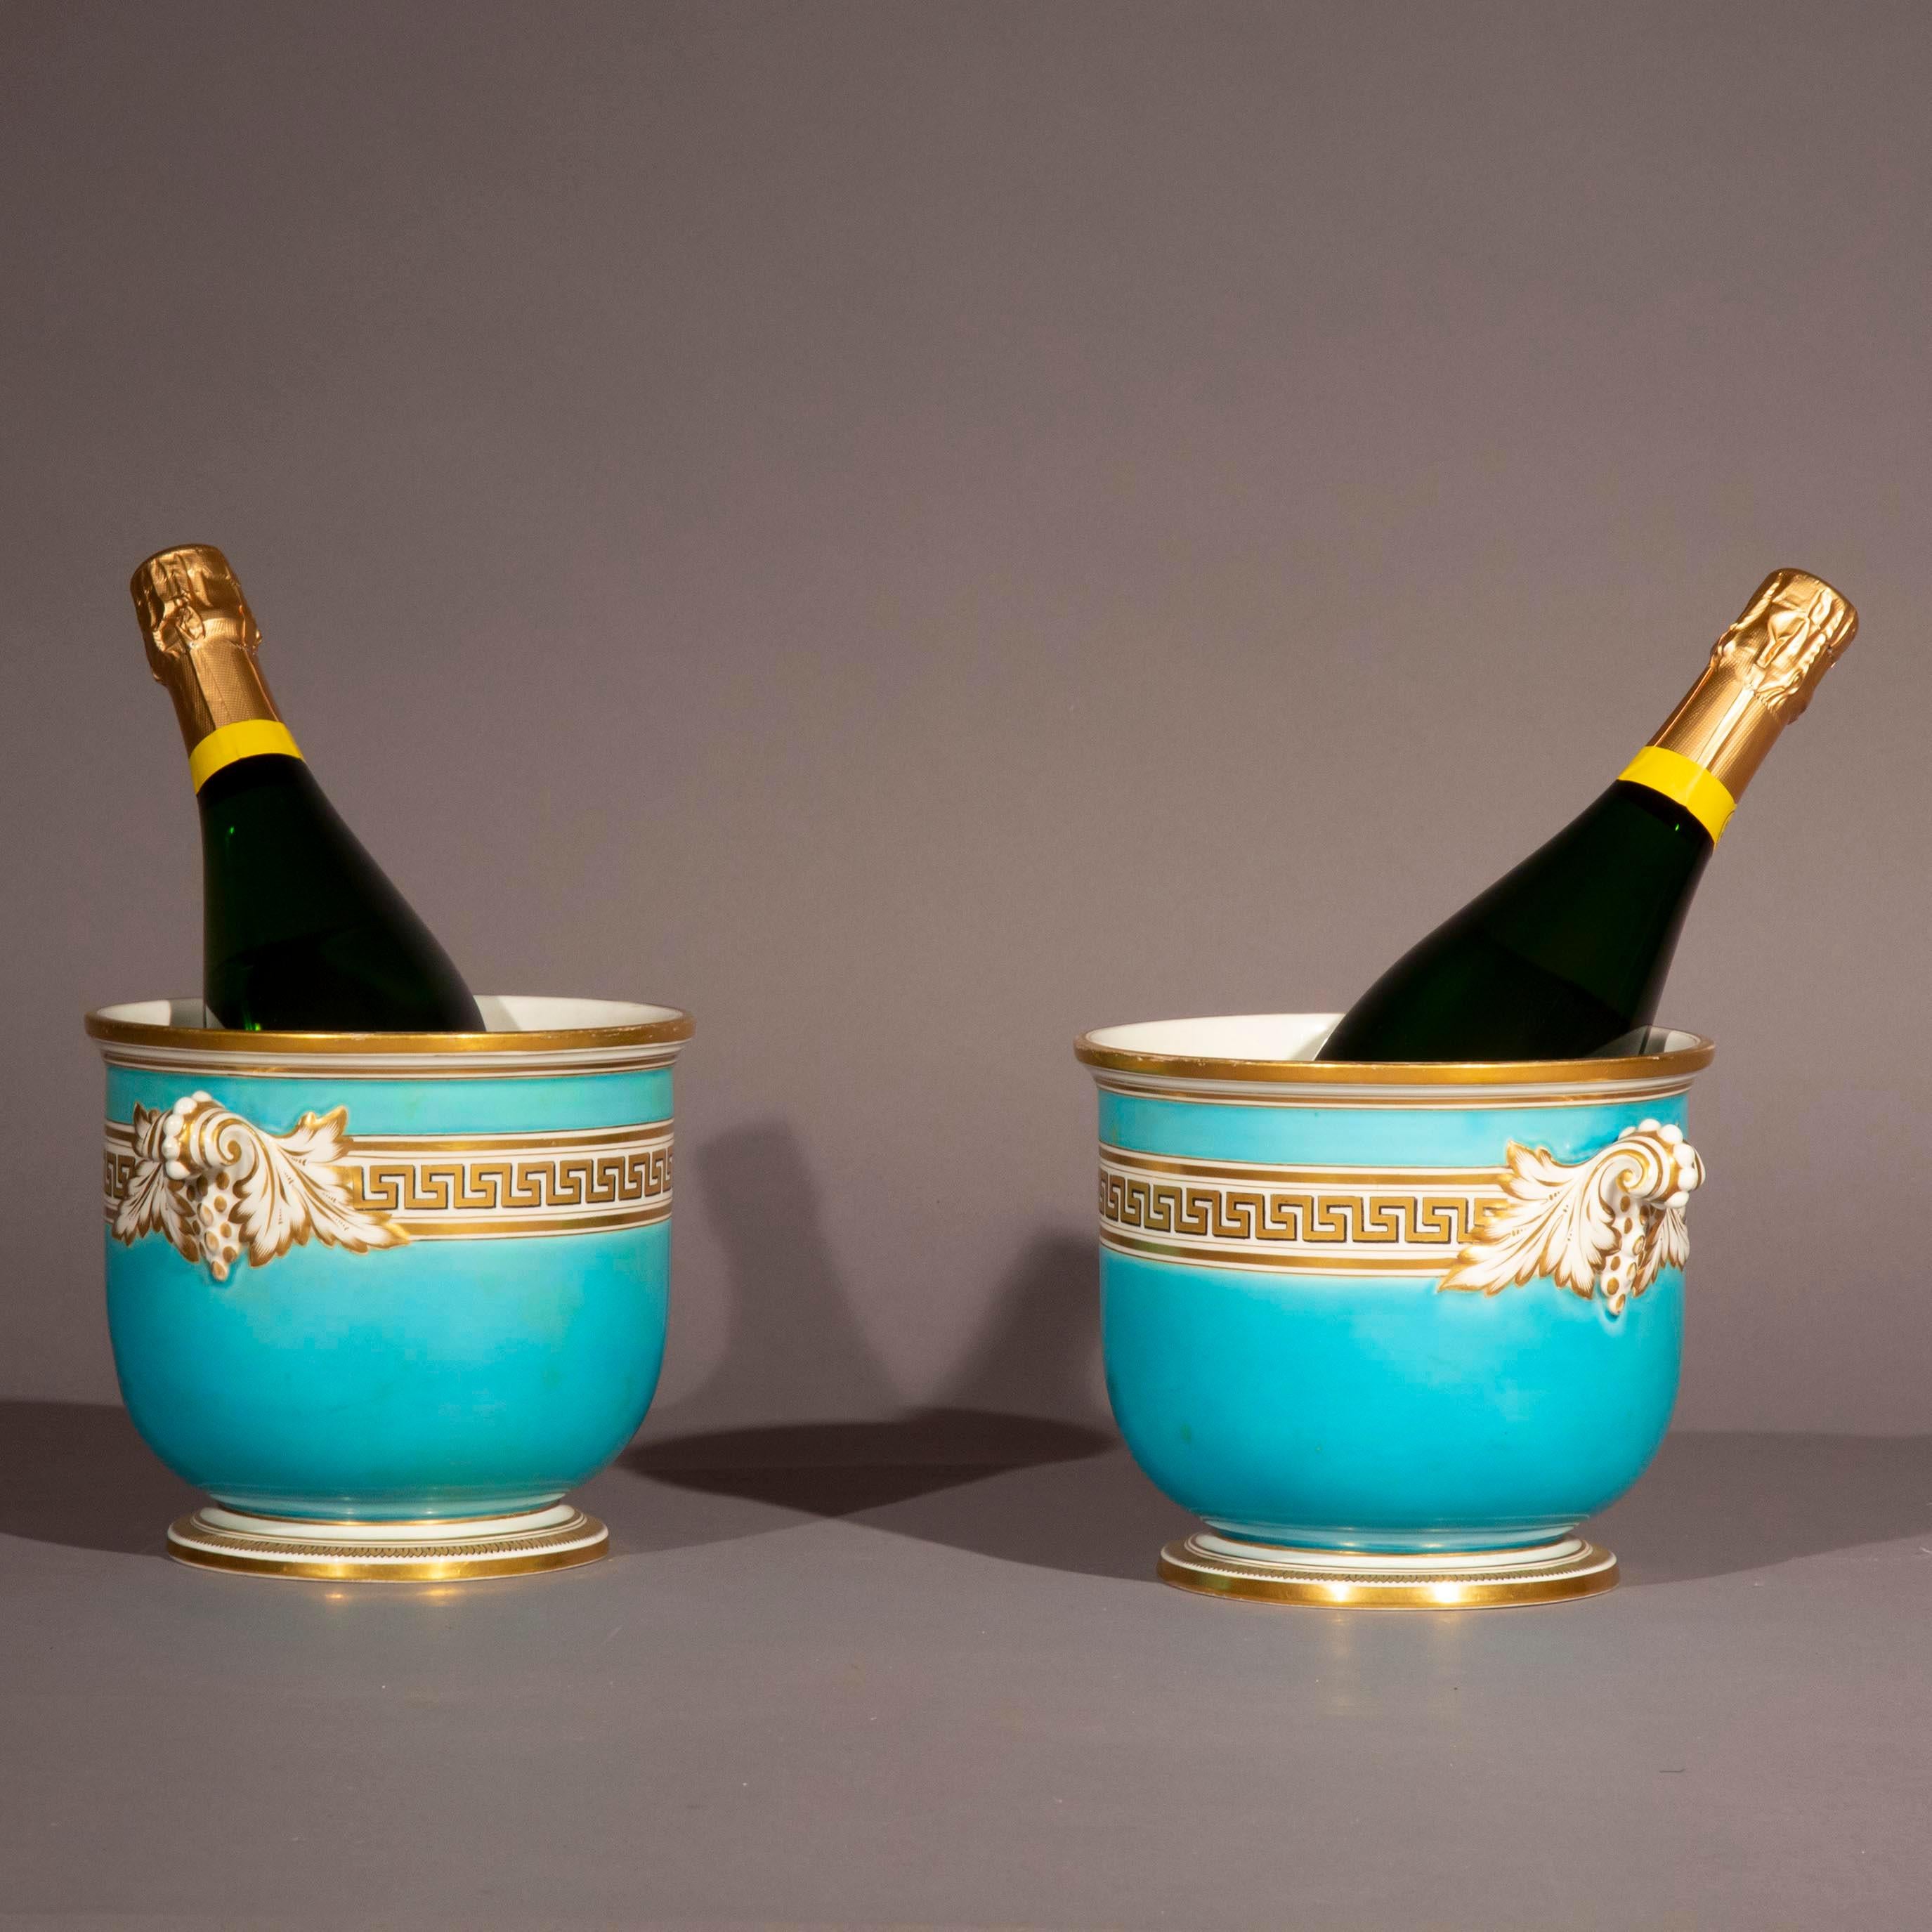 A decorative pair of porcelain cache-pots or planters with Greek key decoration

France, mid-19th century.

Why we like them

Of beautiful sky-blue colour with gold accents, these pots are very pretty and versatile. Perfect for flowers or